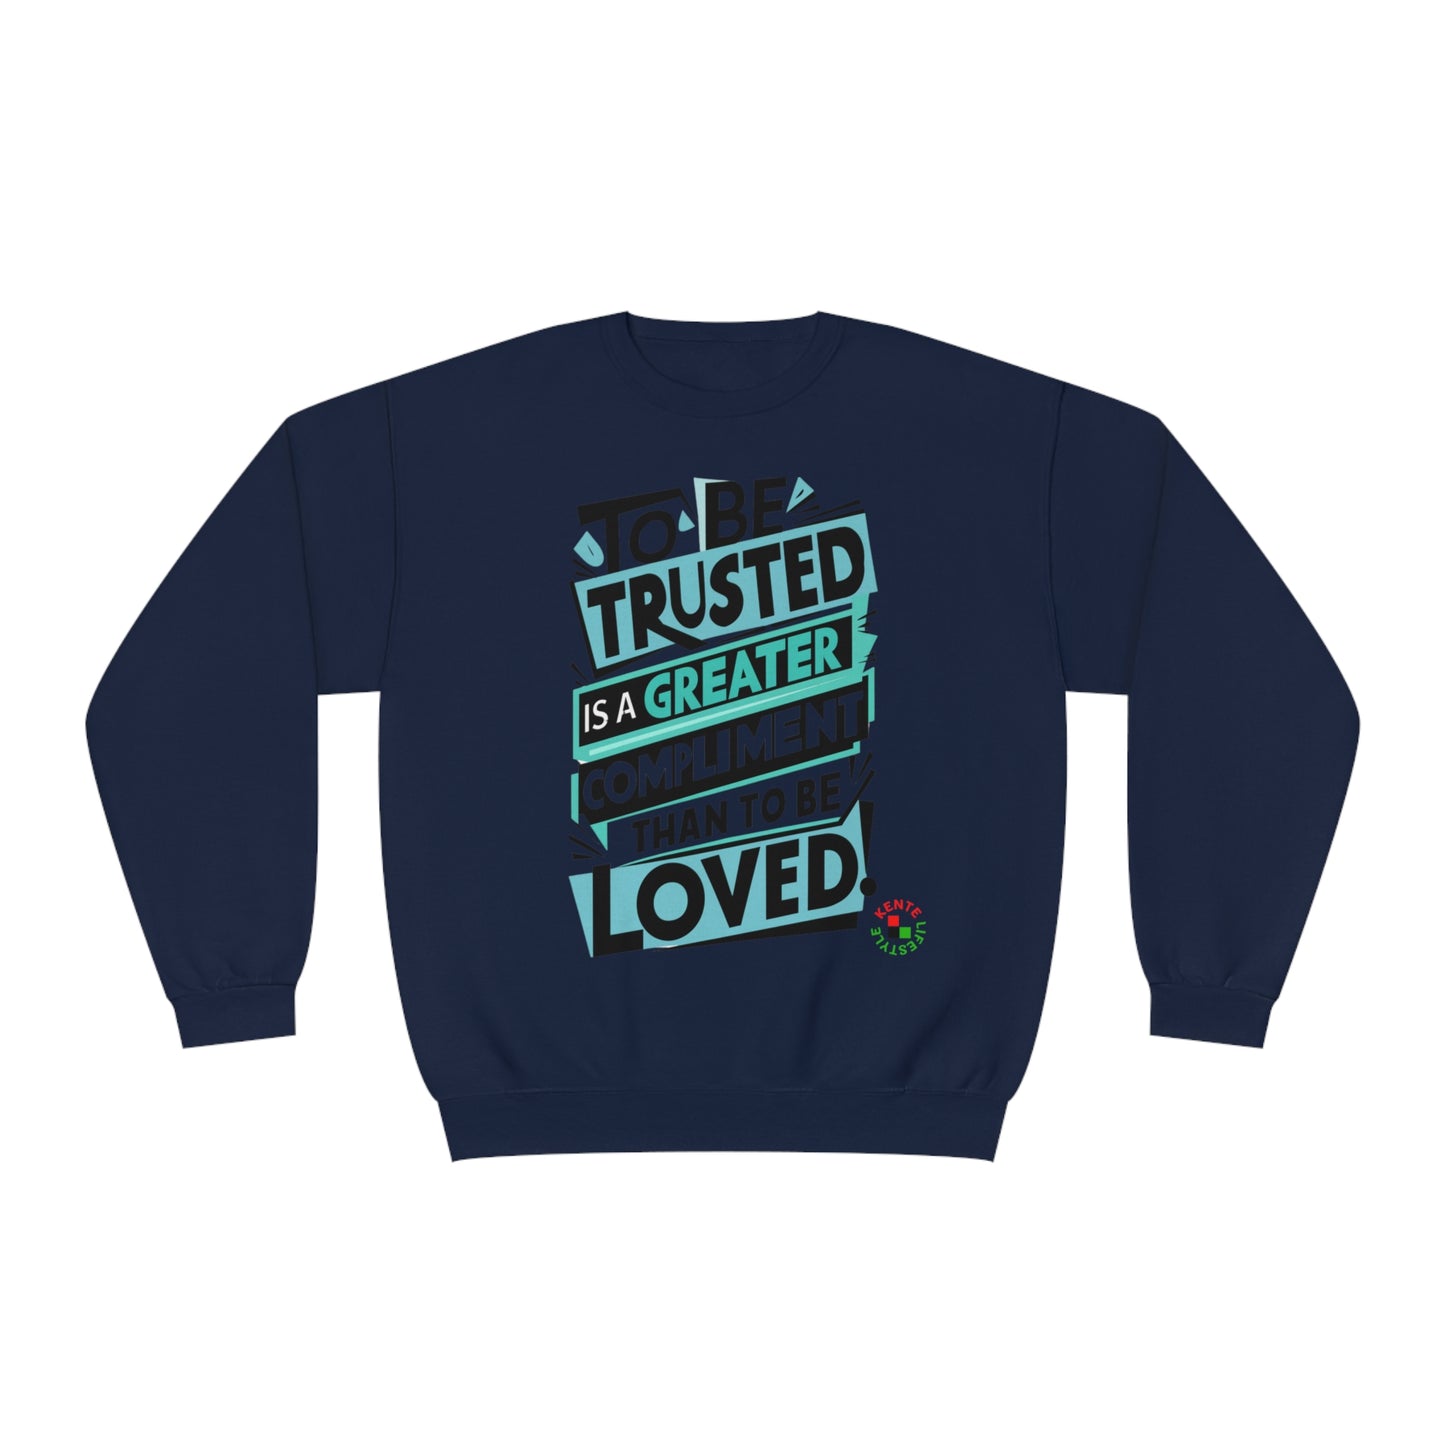 "To Be Trusted is a Greater Compliment than to be Loved" - Sweatshirt